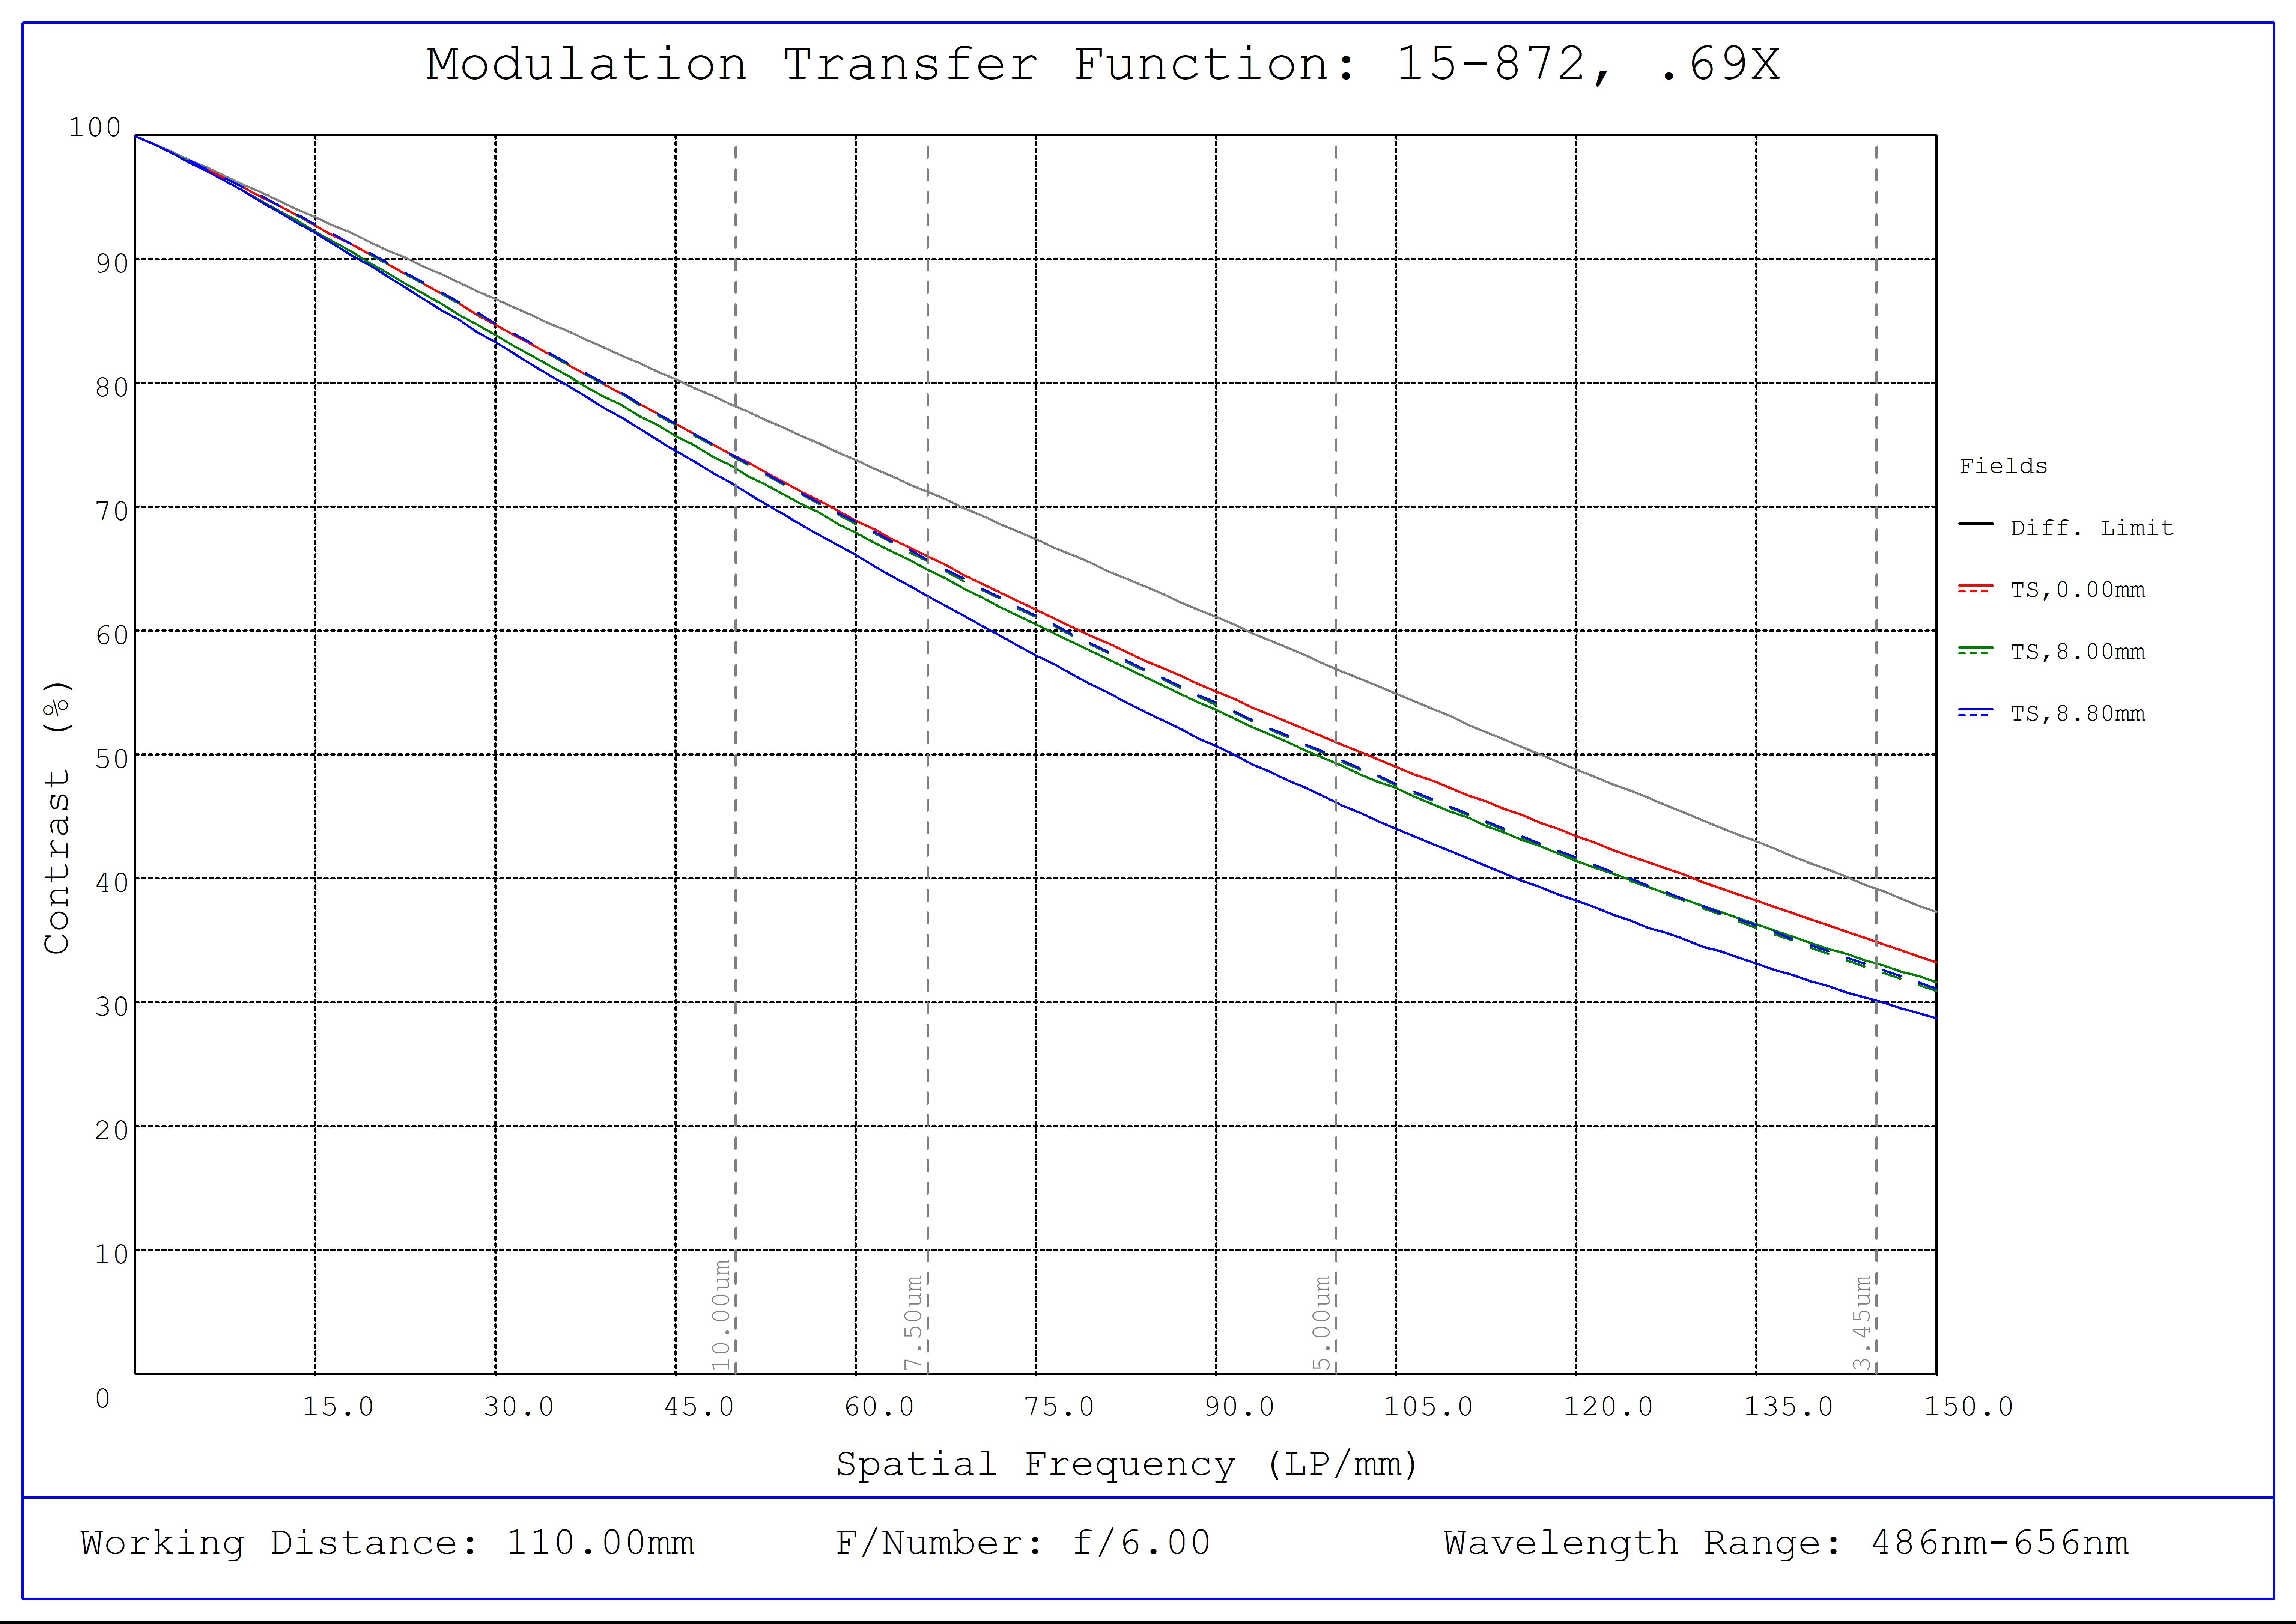 #15-872, 0.69X CobaltTL Telecentric Lens, Modulated Transfer Function (MTF) Plot, 110mm Working Distance, f6